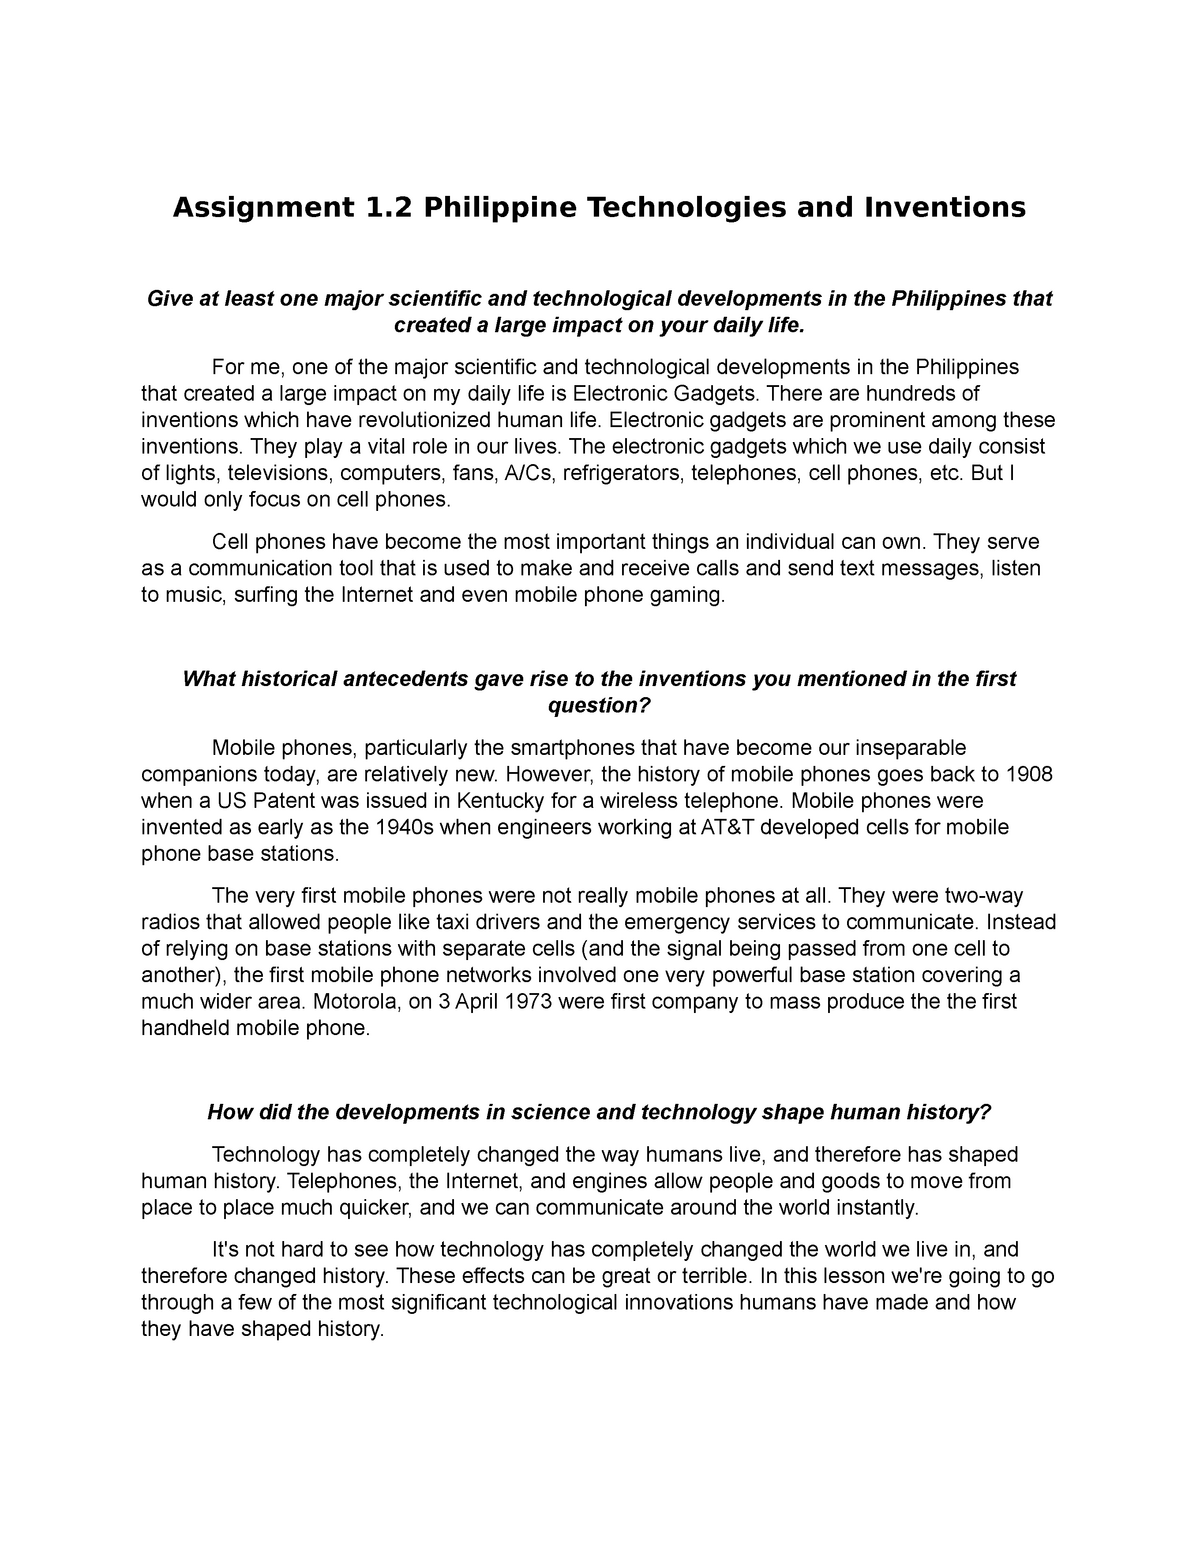 thesis for computer engineering in the philippines